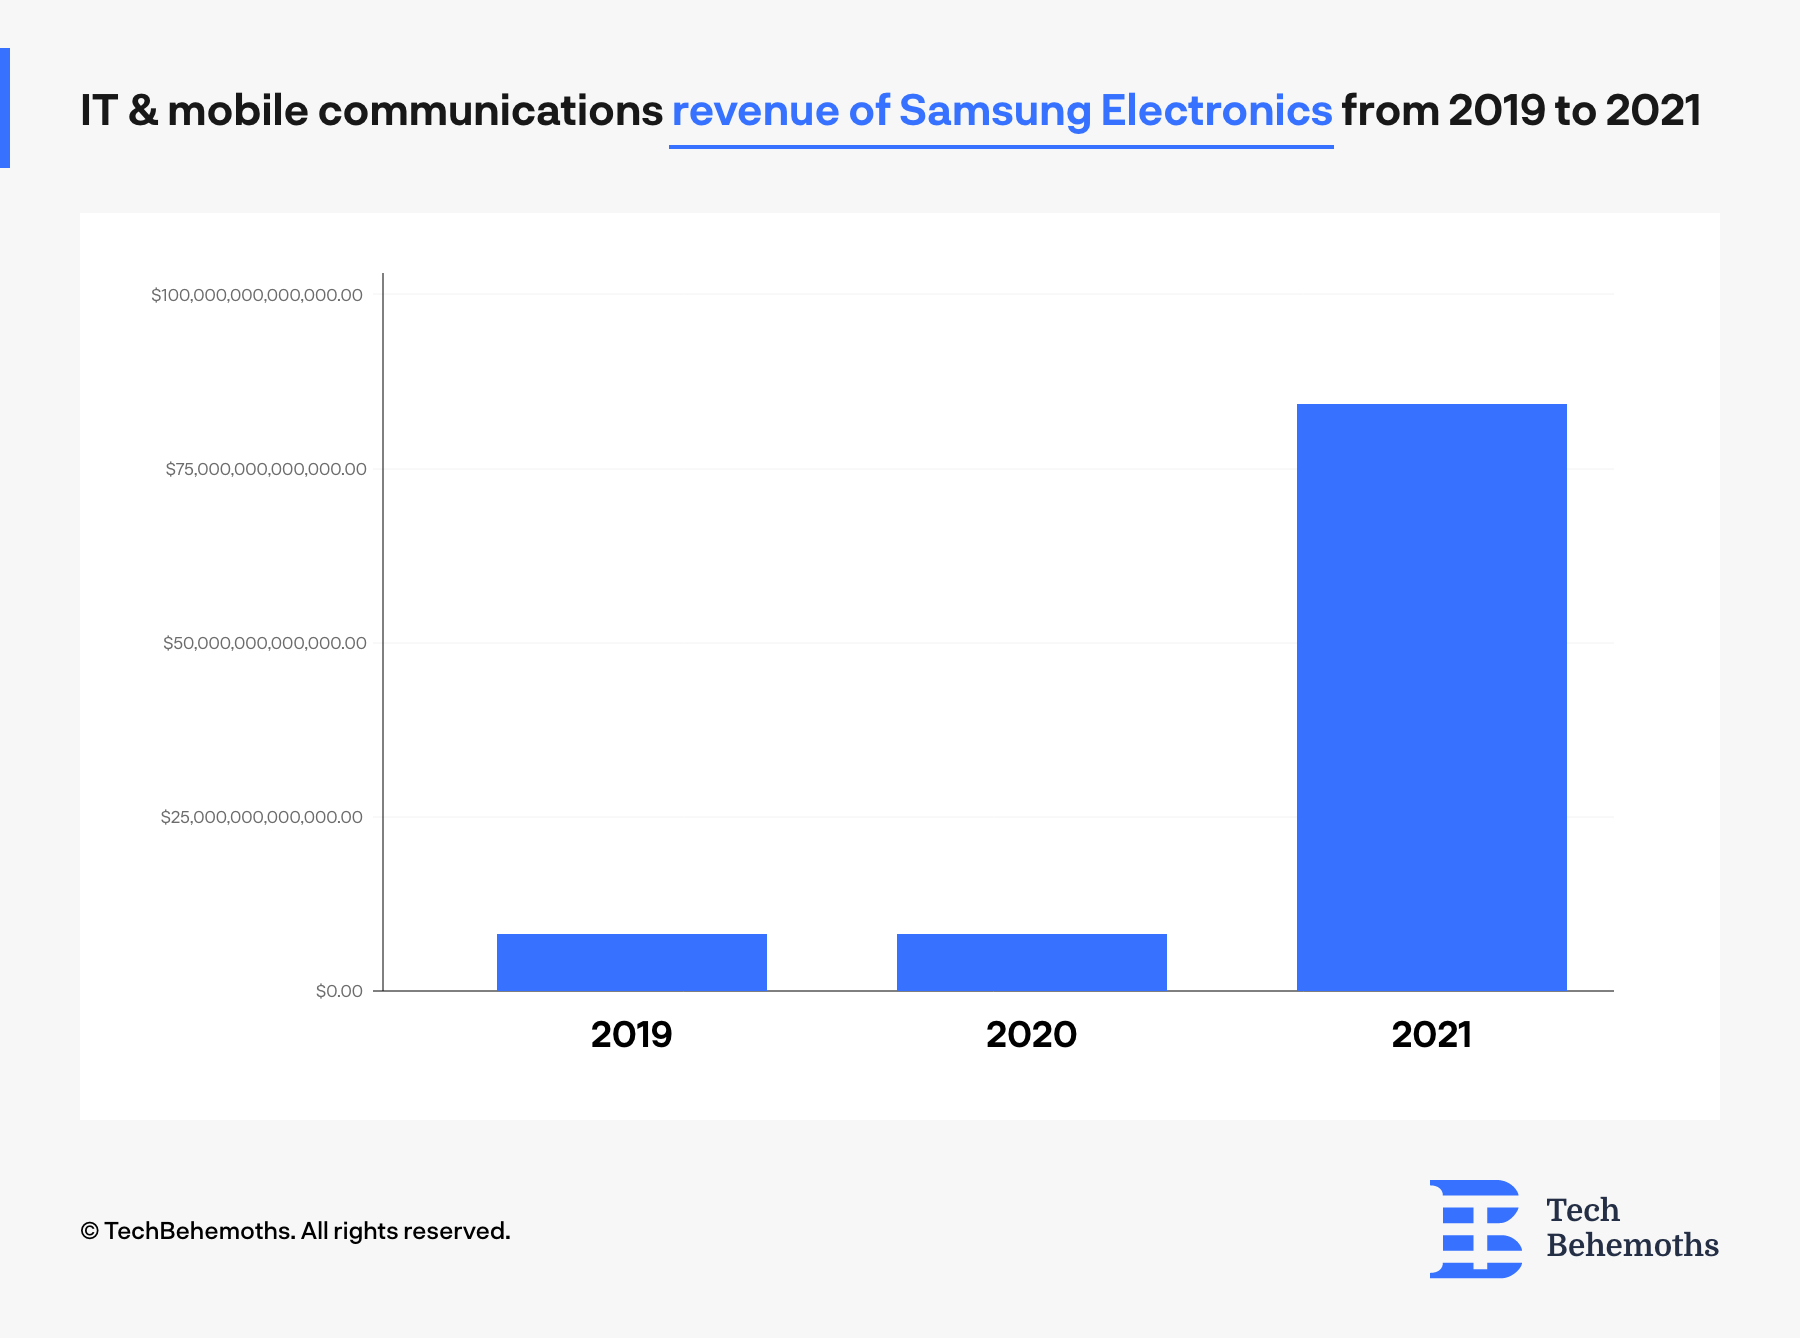  IT and Mobile Communications Revenue for Samsung Electronics in 2021